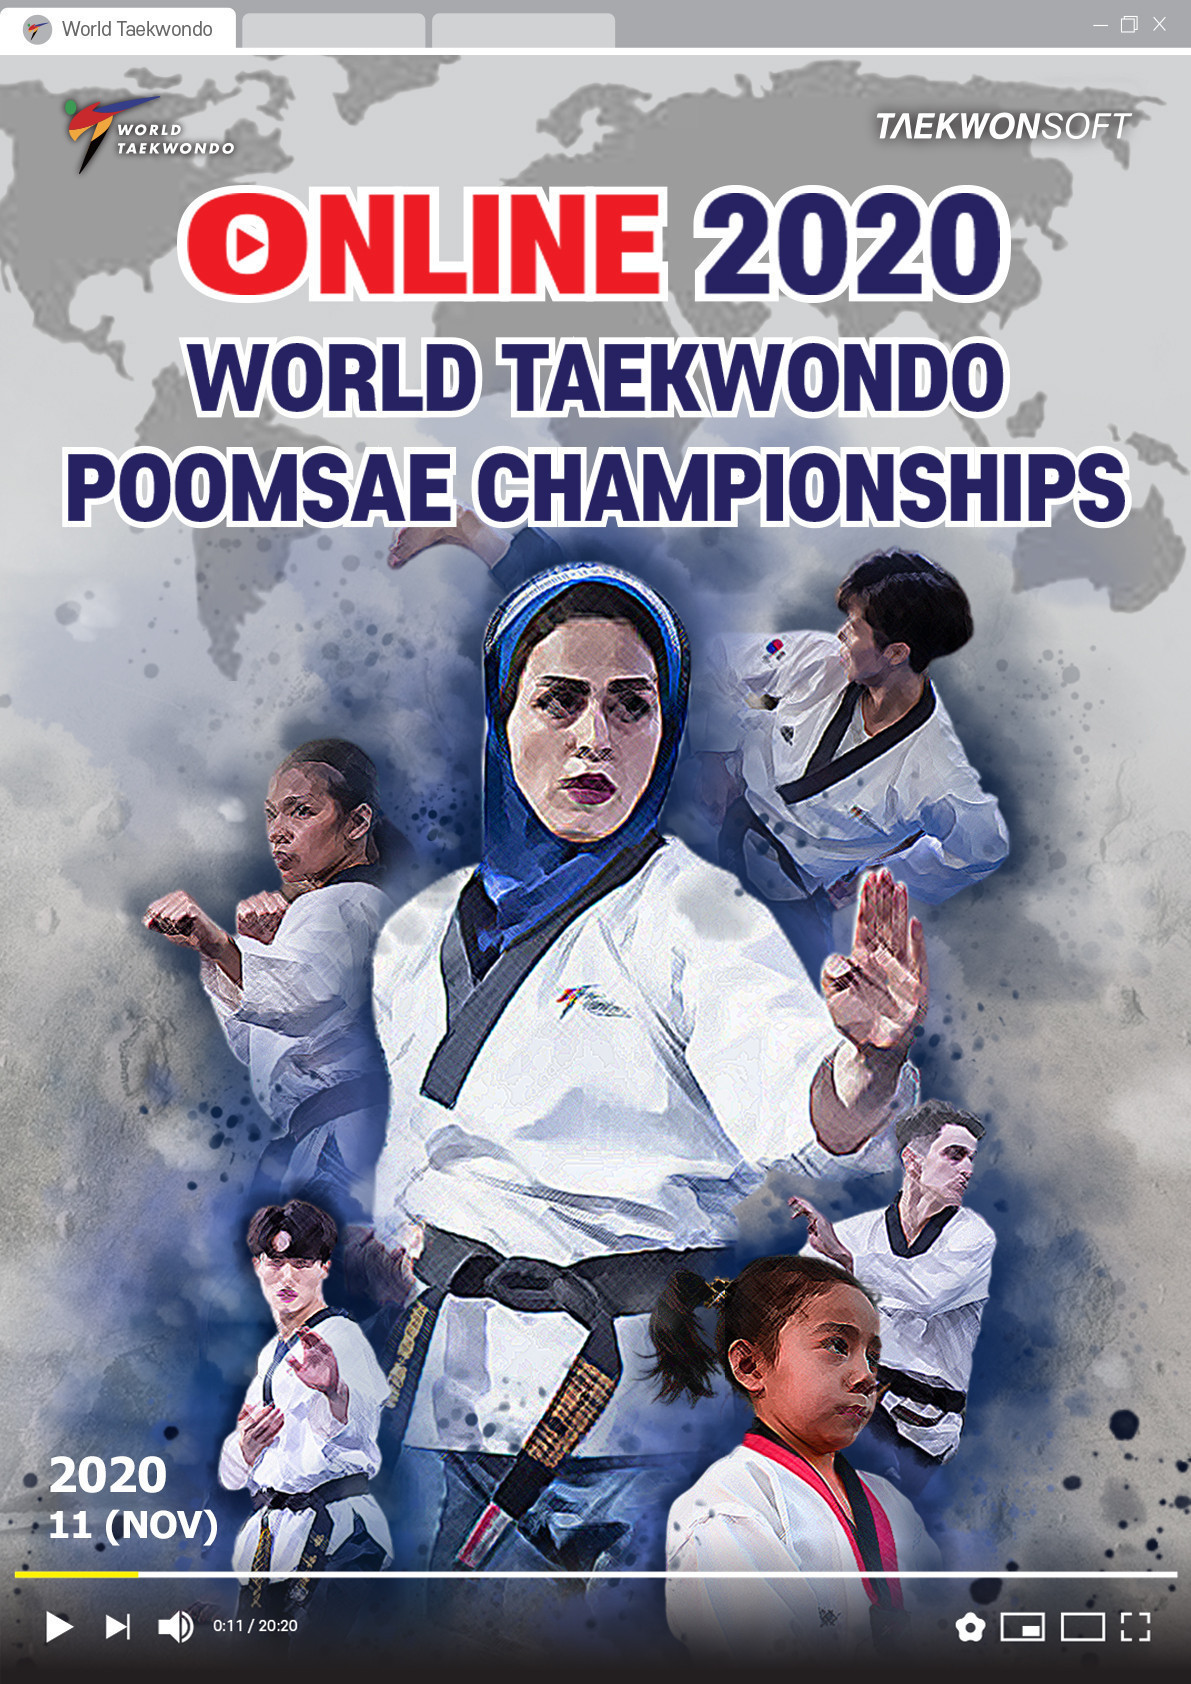 The event will be fully virtual for the first time ©World Taekwondo